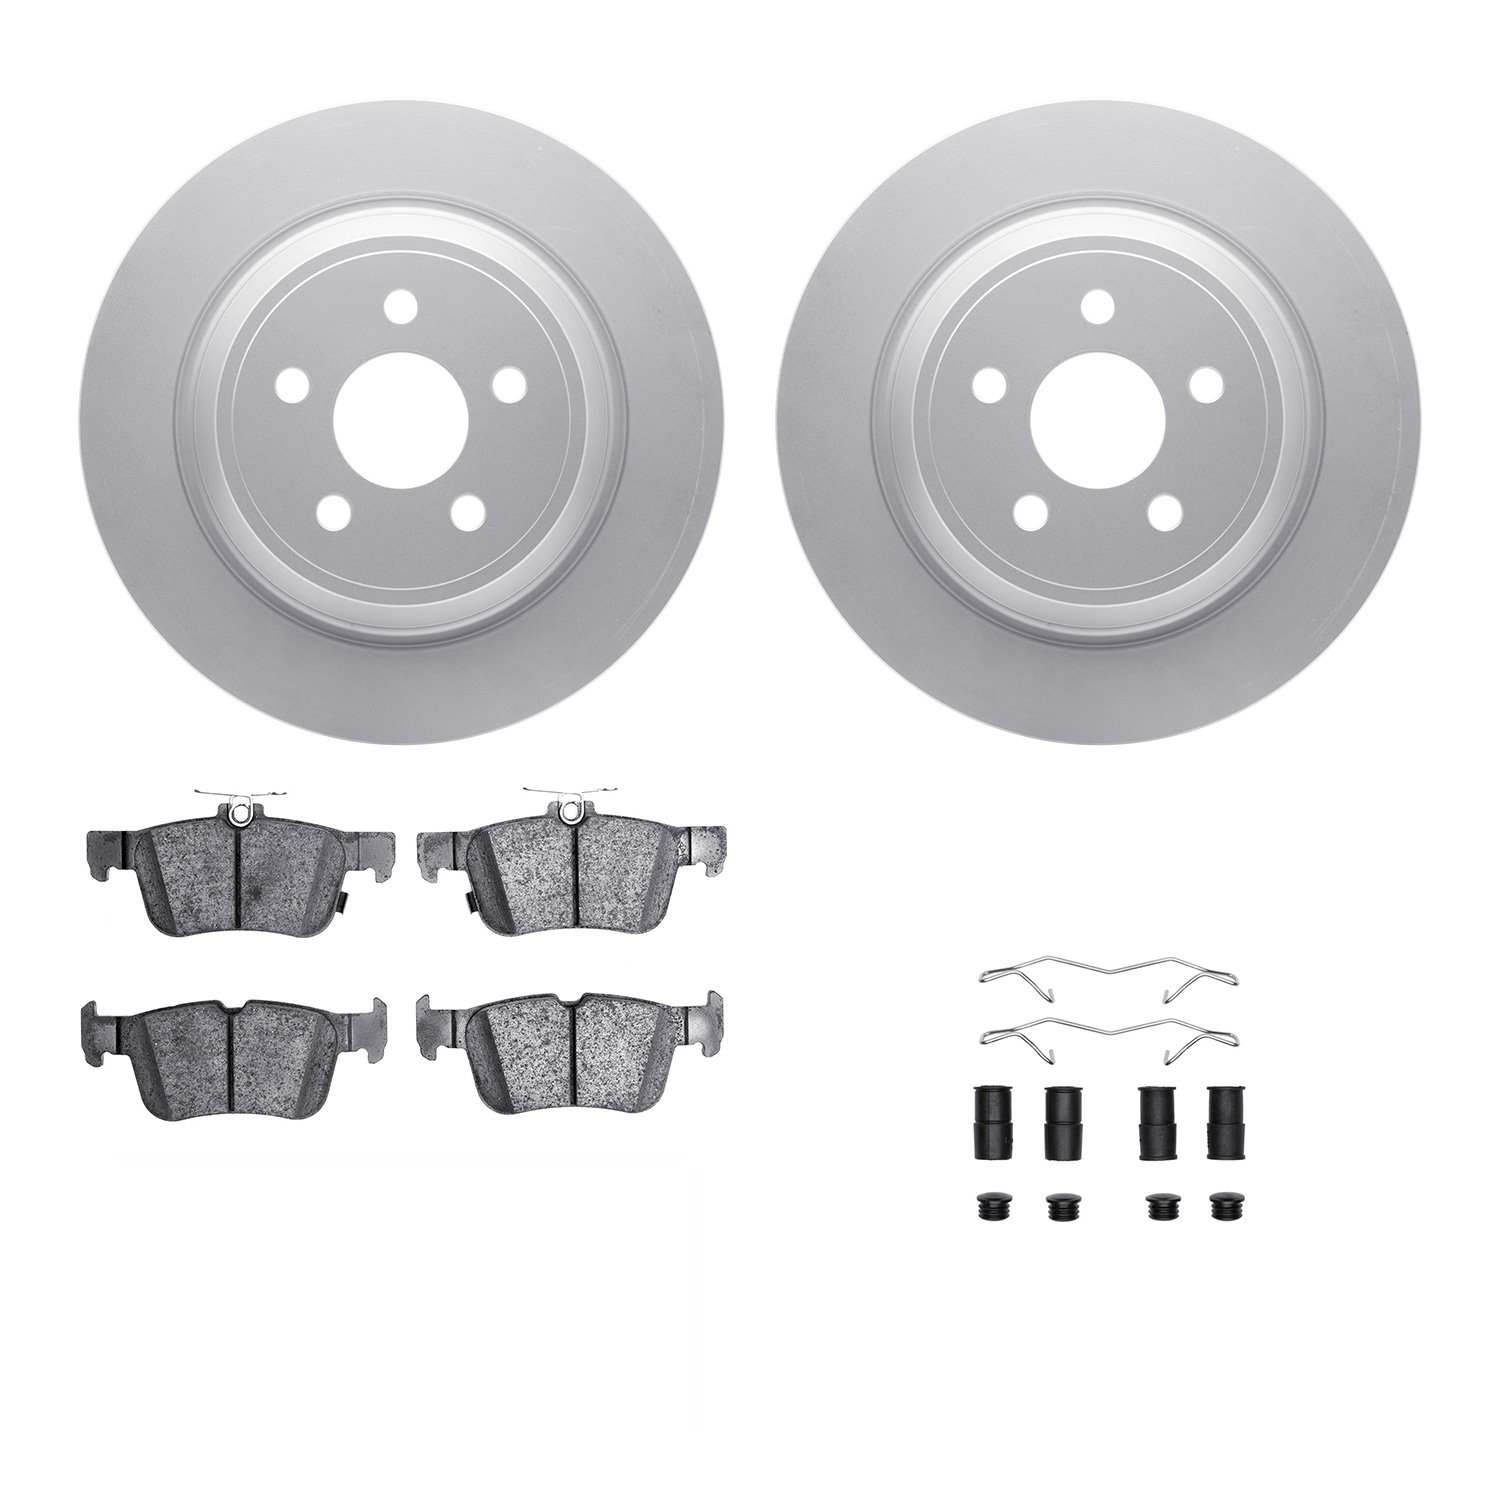 4312-55006 Geospec Brake Rotors with 3000-Series Ceramic Brake Pads & Hardware, Fits Select Ford/Lincoln/Mercury/Mazda, Position